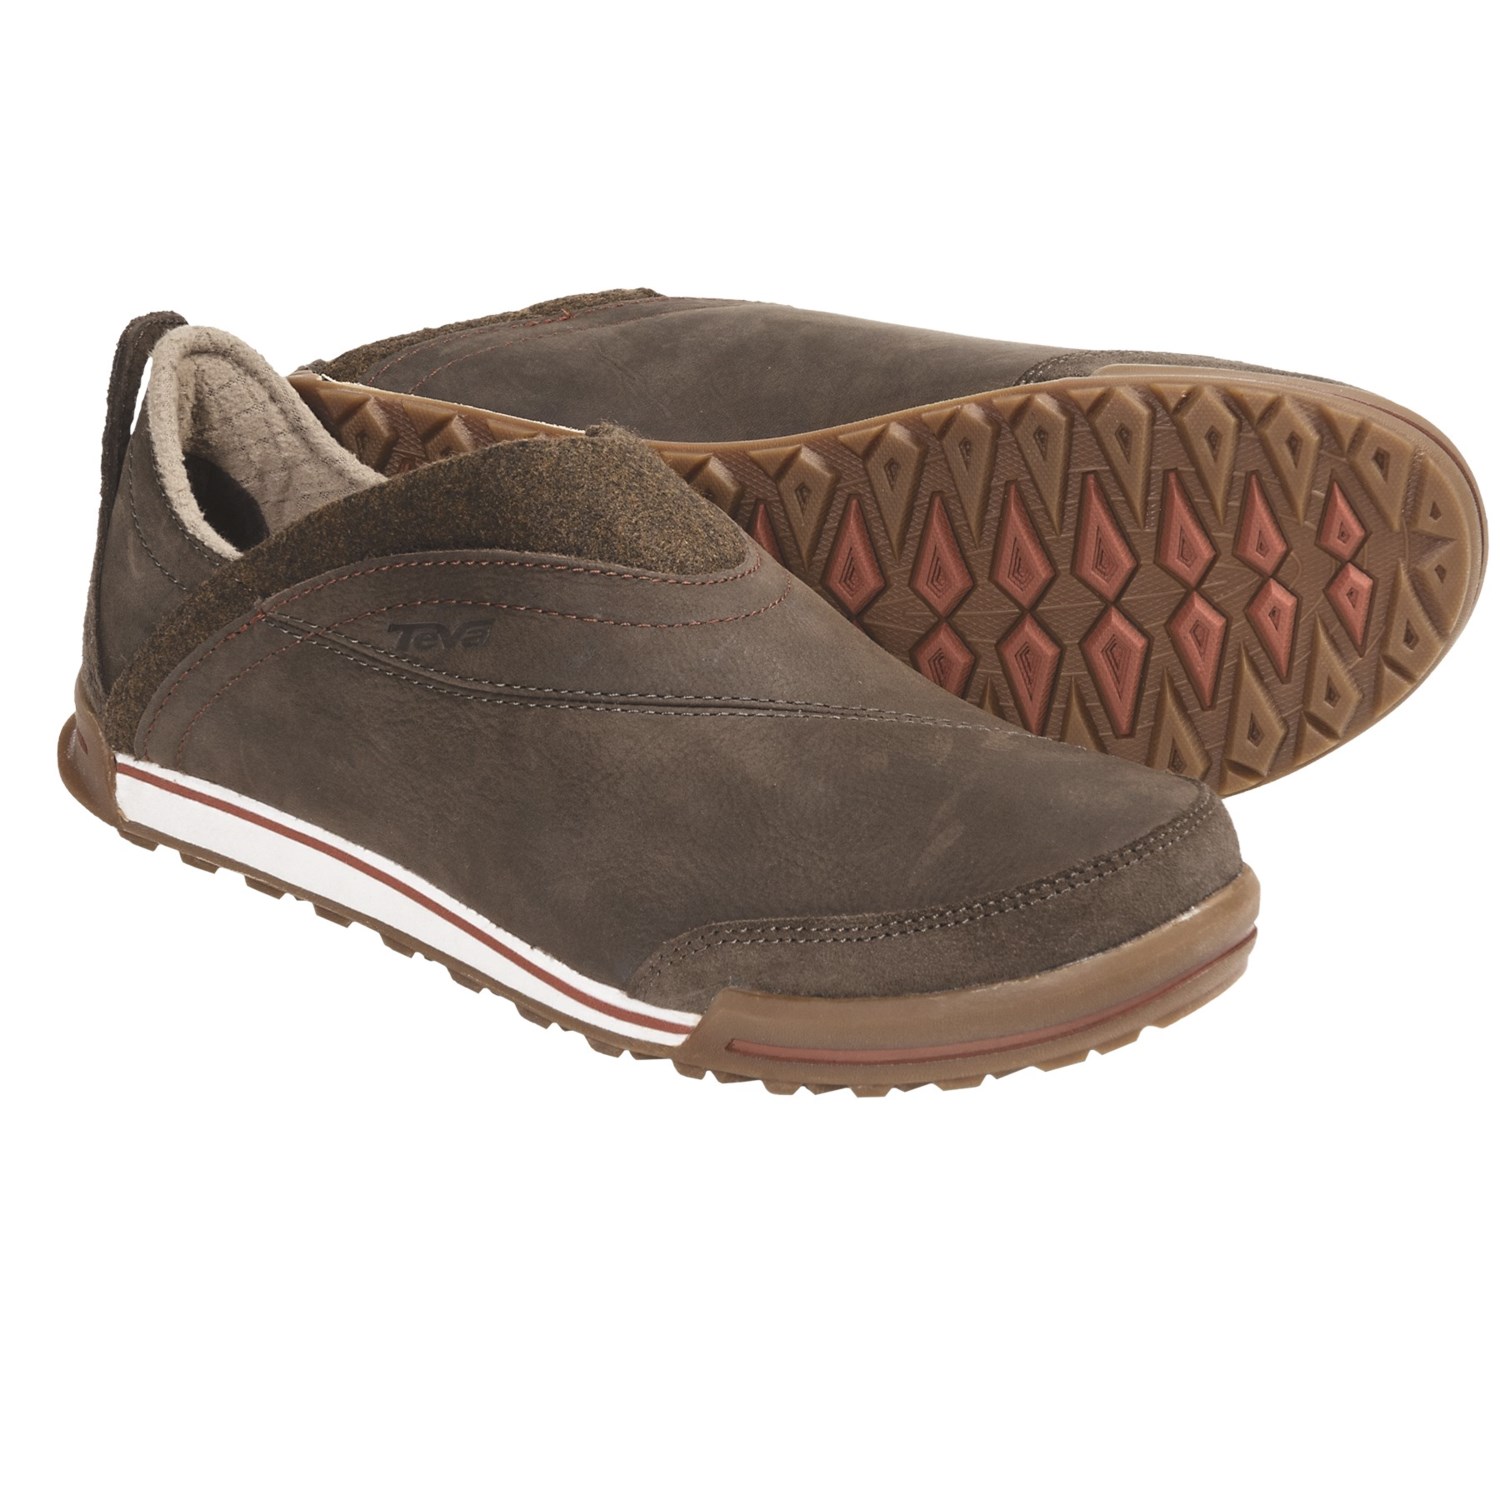 Teva Haley Shoes (For Women) 5702D - Save 84%